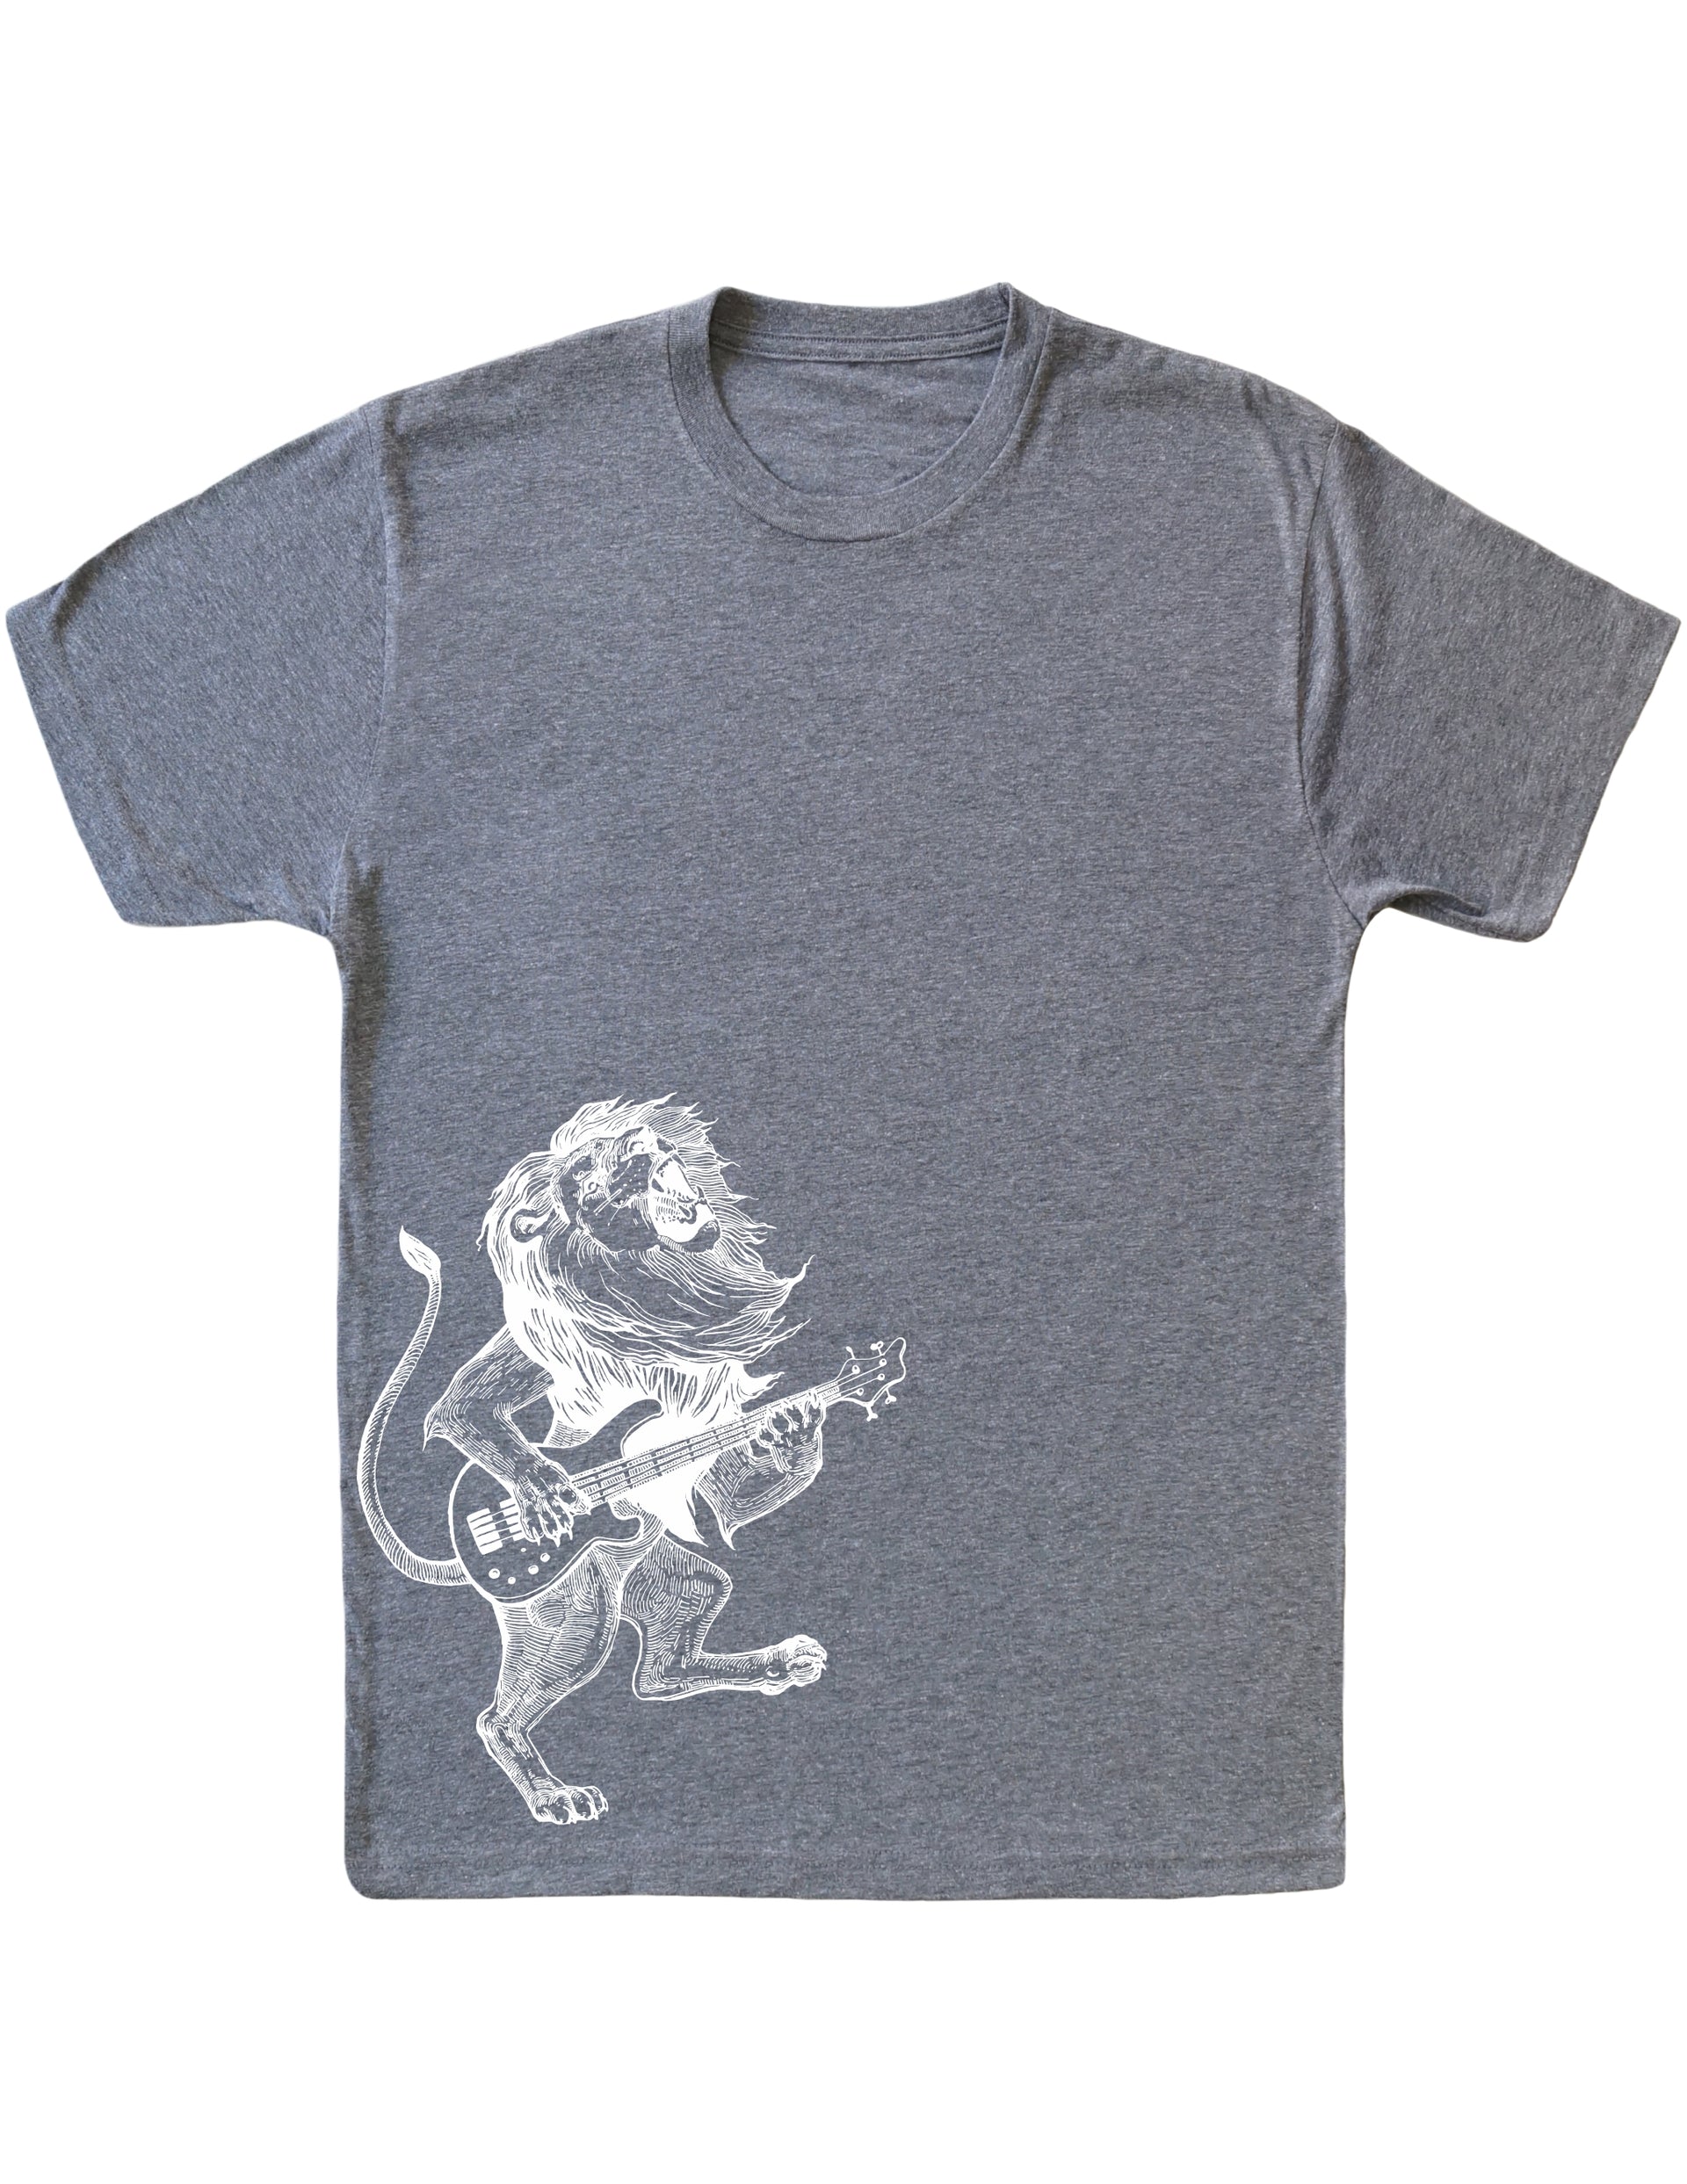 seembo-lion-guitar-player-guitarist-play-music-design-art-on-a-vintage-grey-t-shirt-side-printed